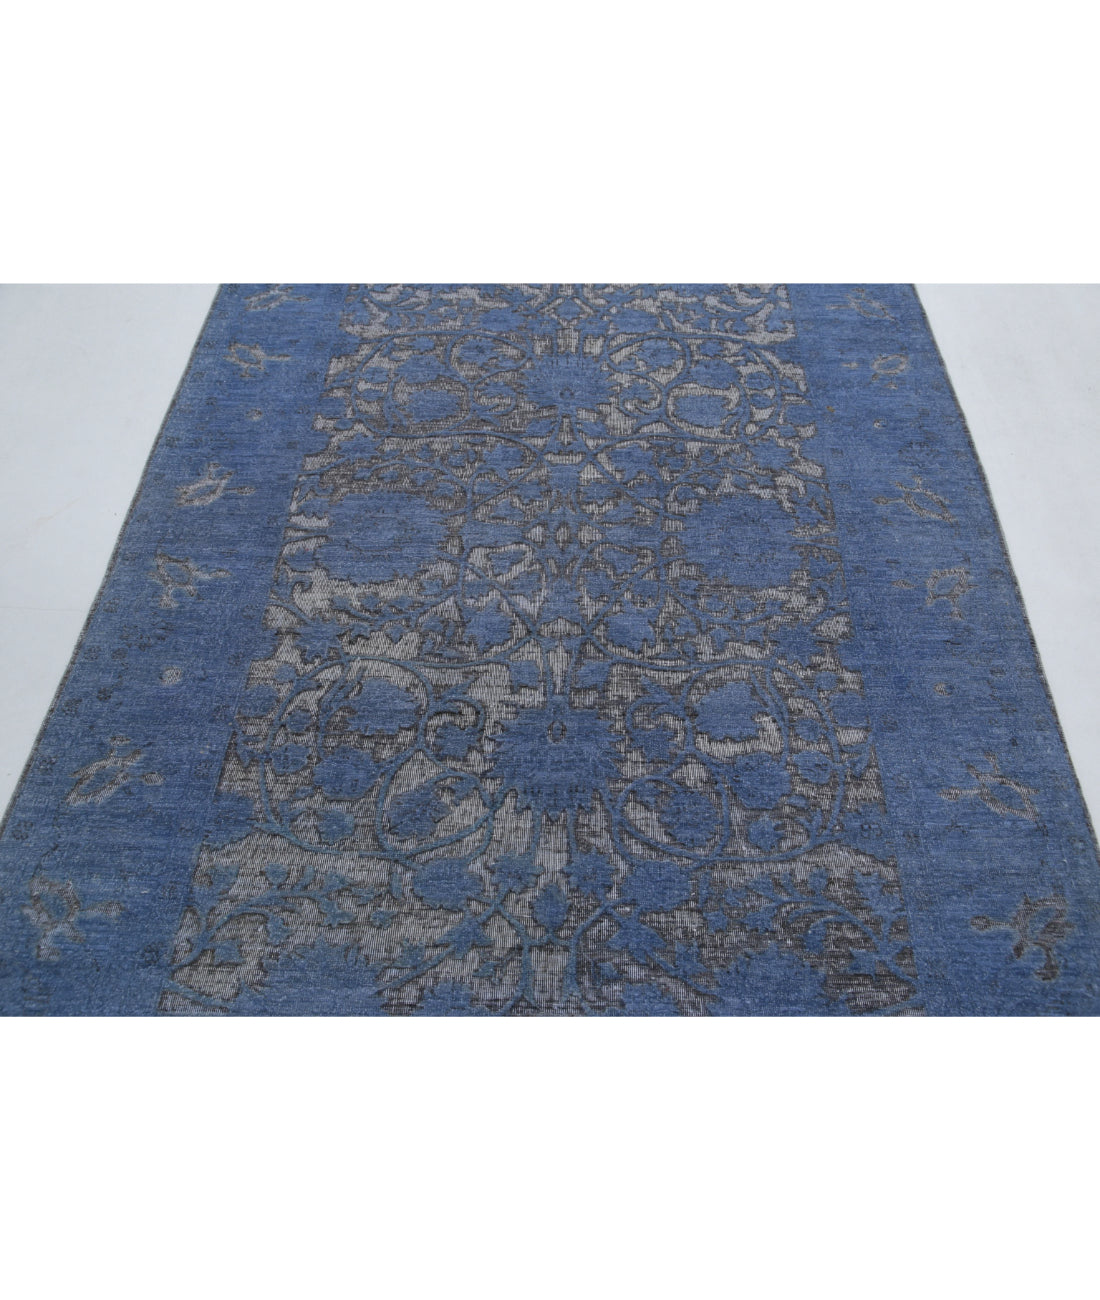 Hand Knotted Onyx Wool Rug - 4'10'' x 6'11'' 4'10'' x 6'11'' (145 X 208) / Blue / Blue